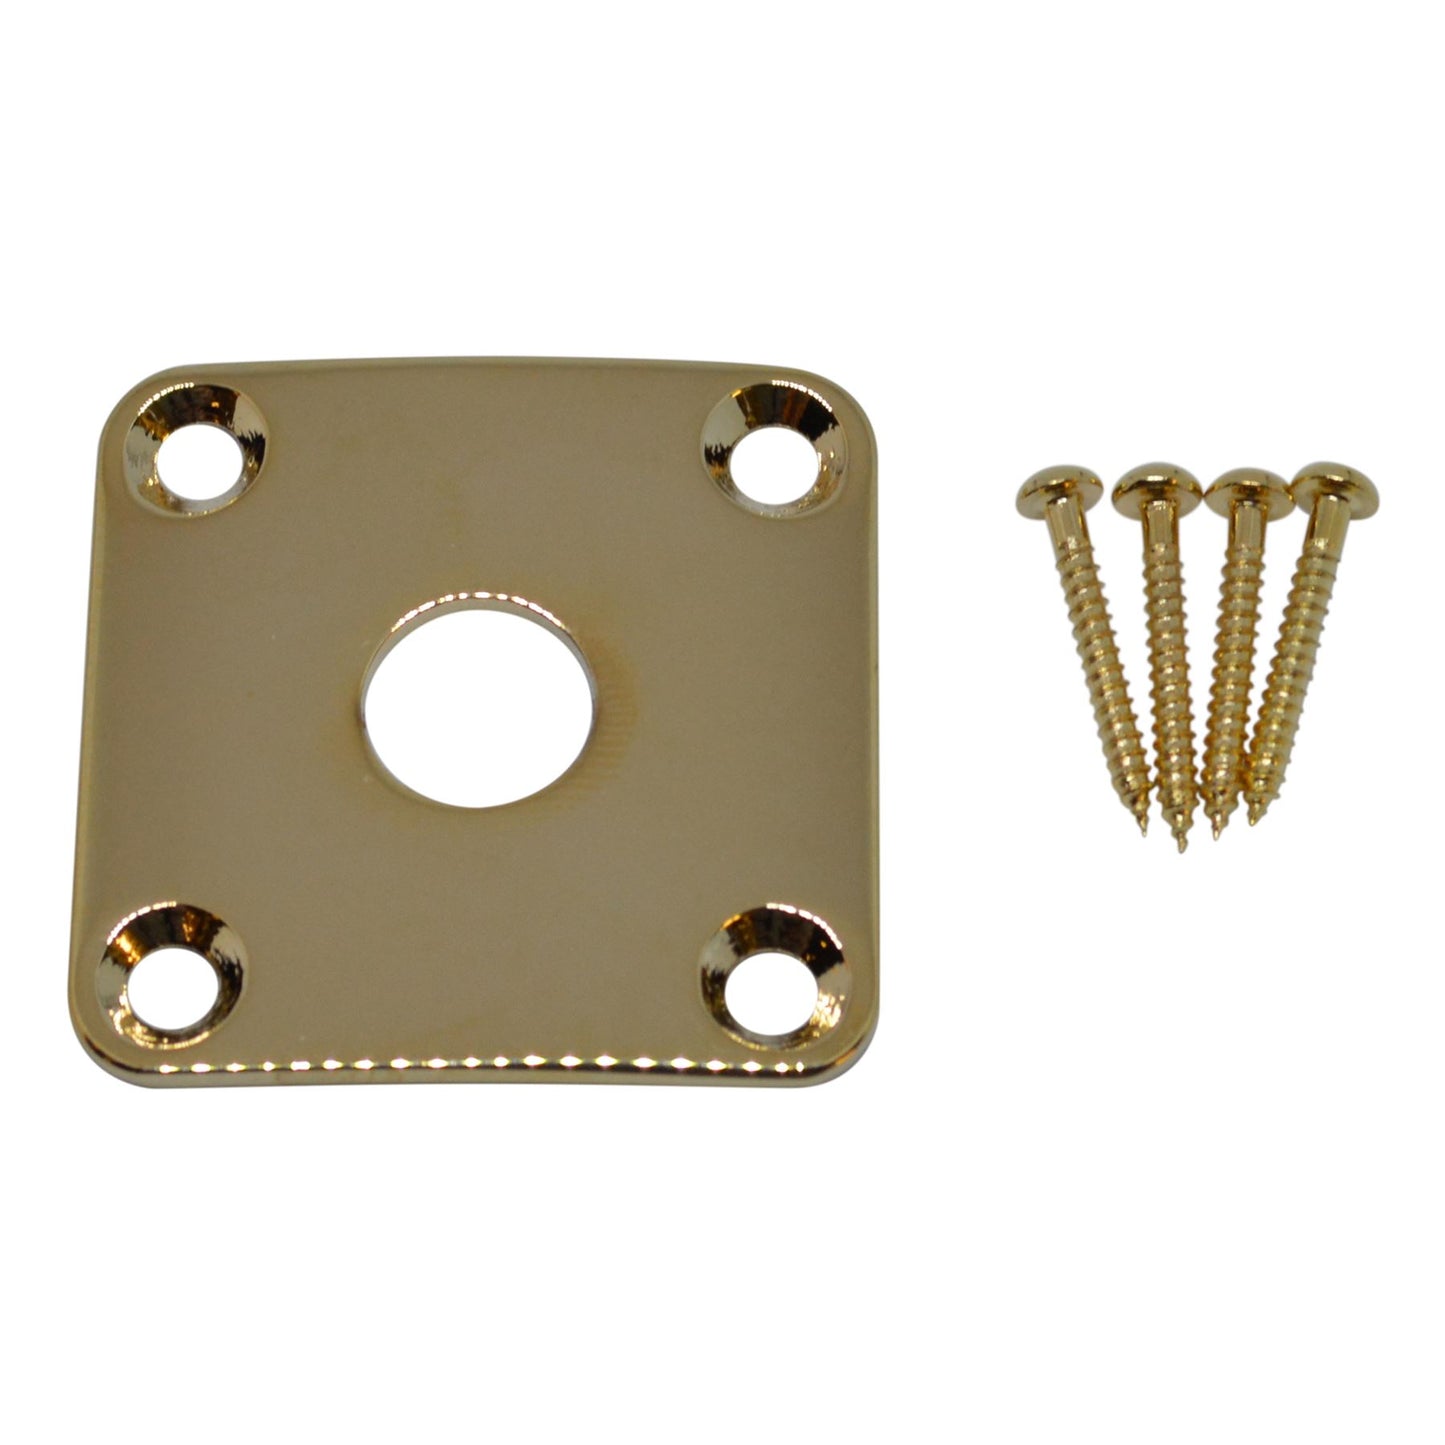 Curved Jack Plate & Screws for Gibson Epiphone Les Paul Electric Guitar